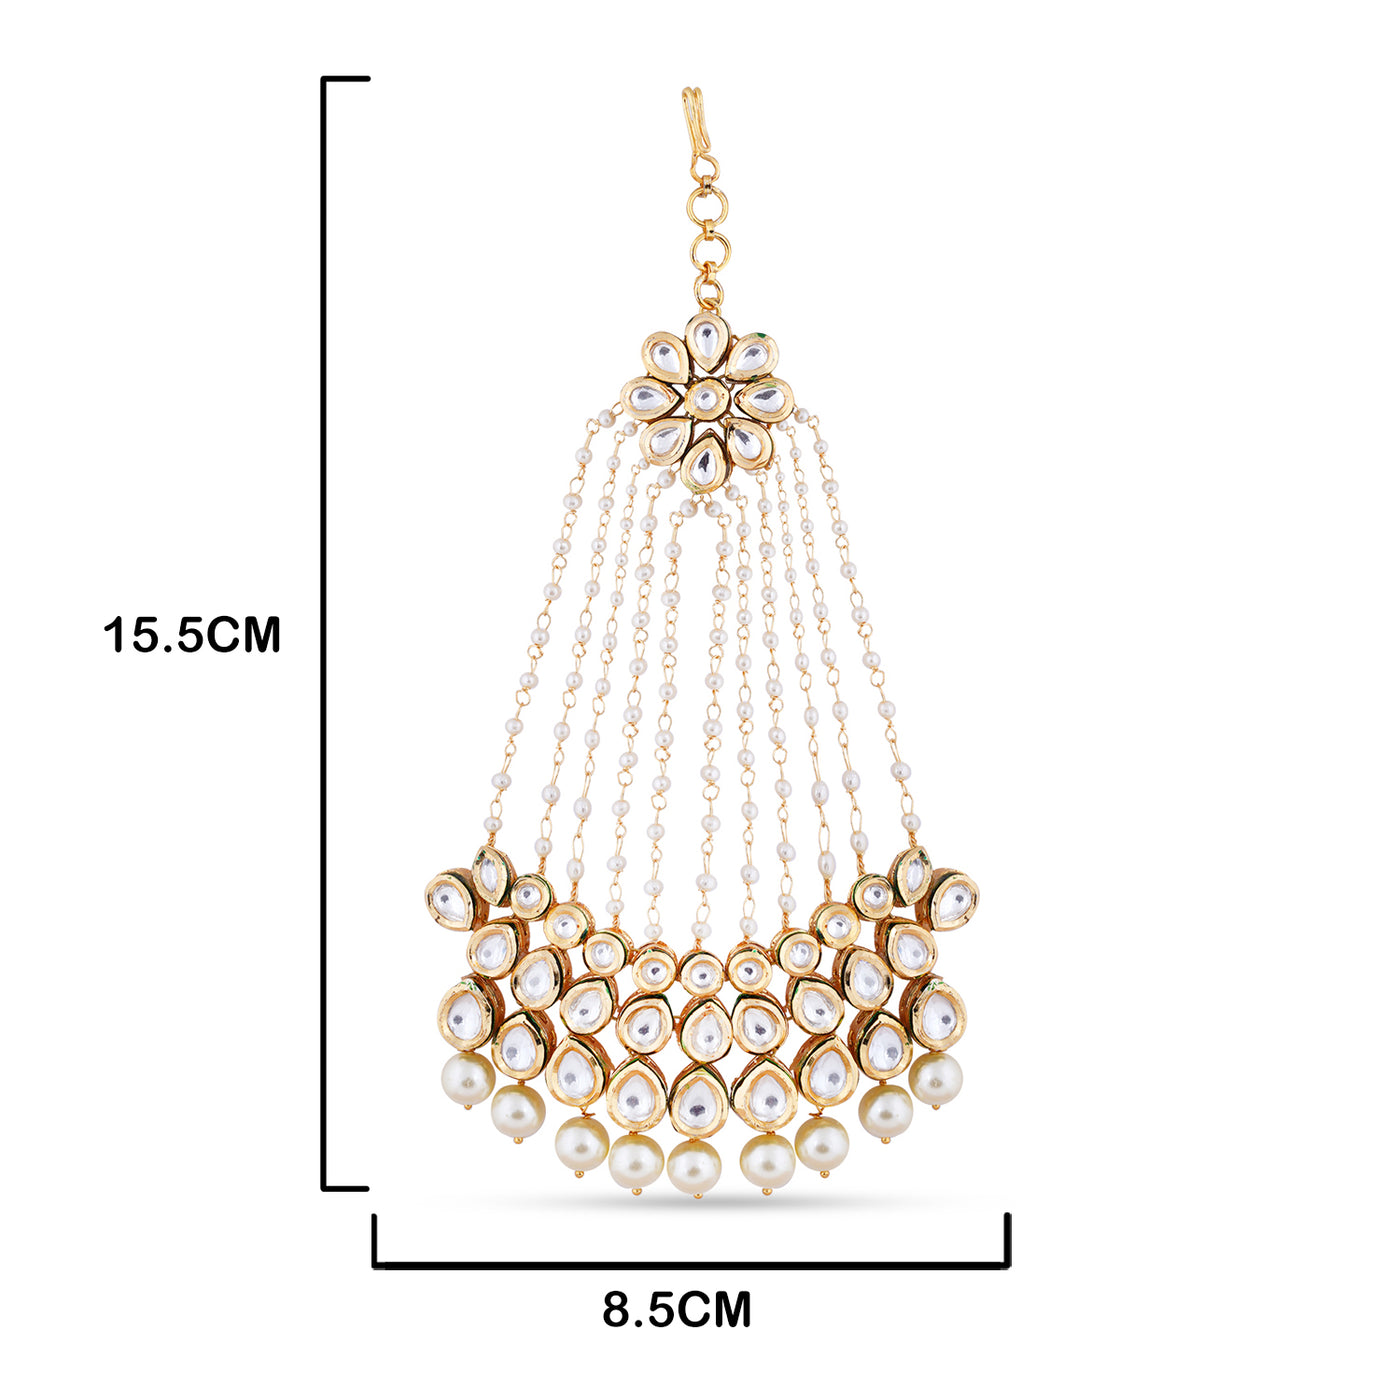  Pearl Stranded Polki Jhumar with measurements in cm. 15.5cm by 8.5cm.